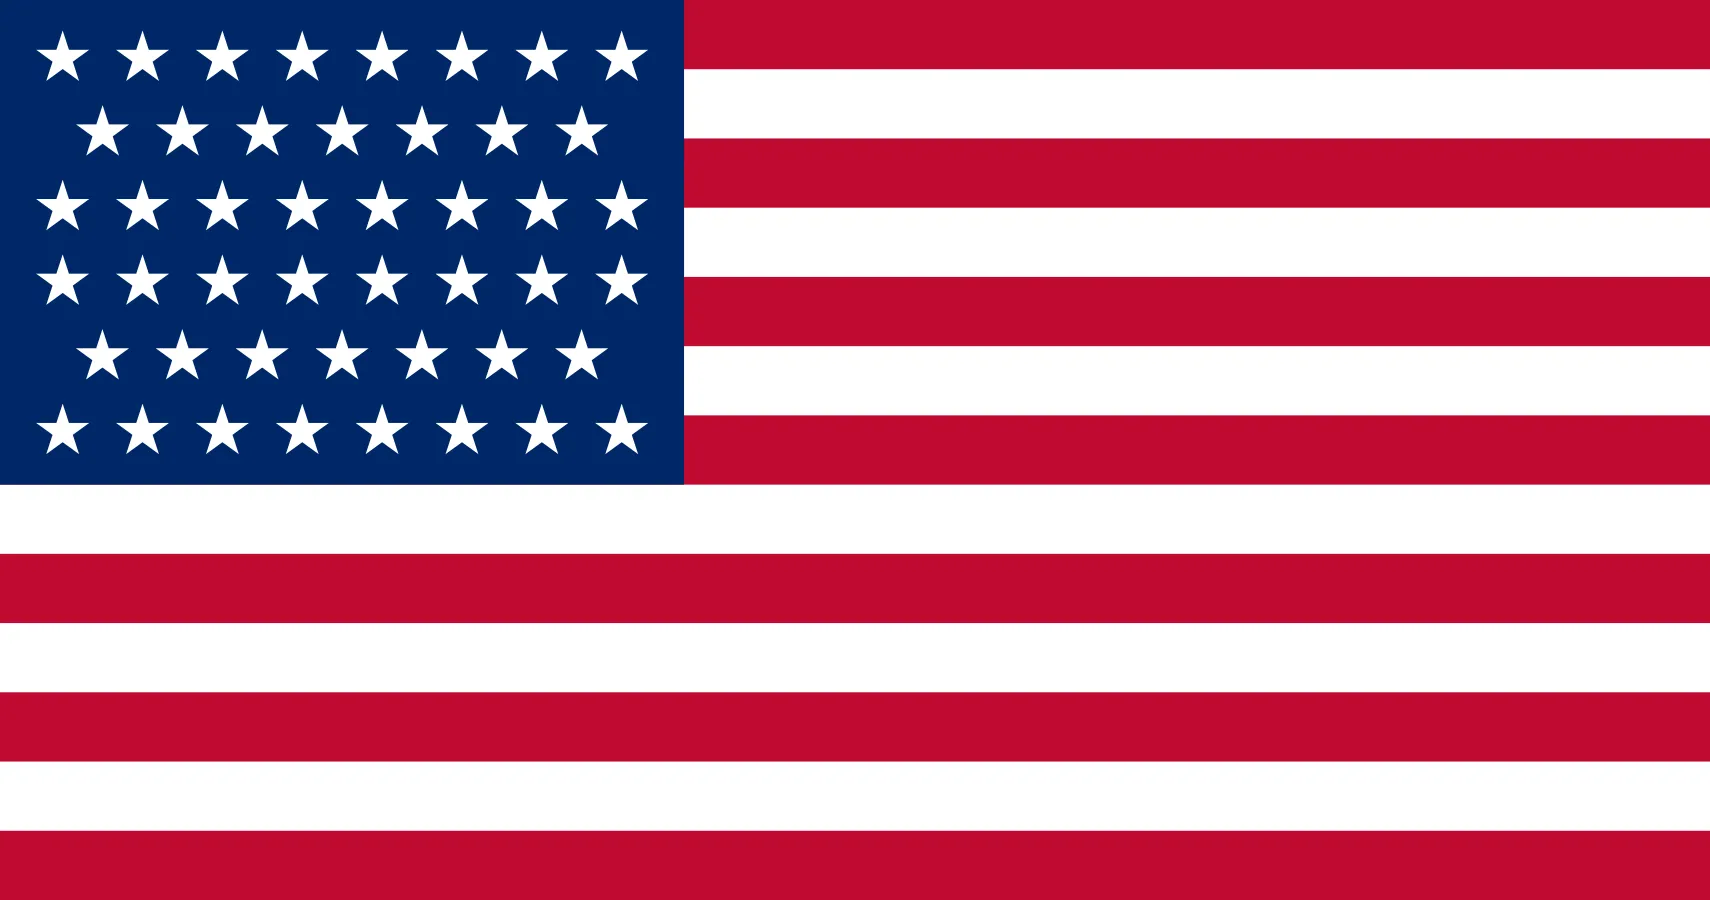 US Flag with 46 stars